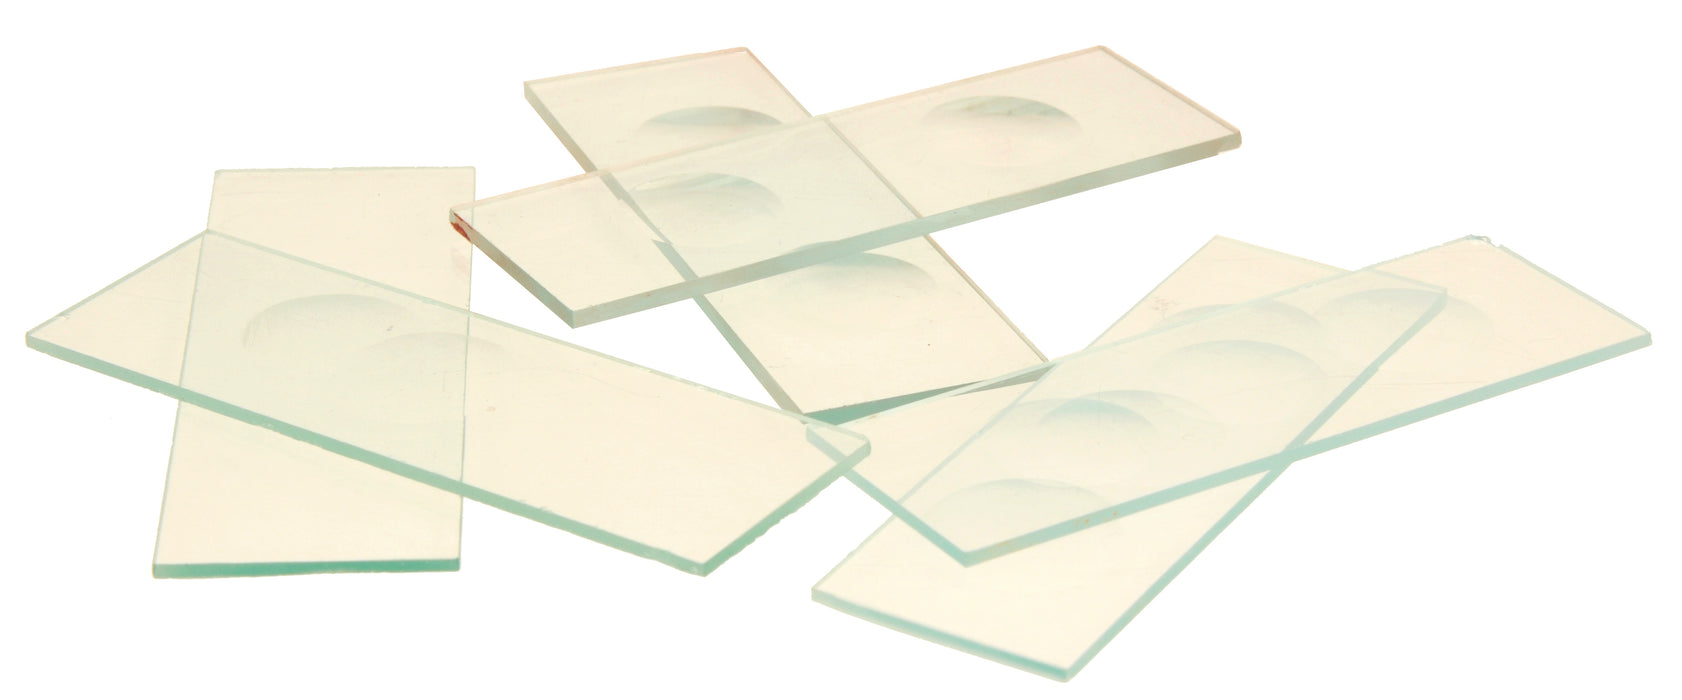 Triple Concavity Microscope Slides, Pack of 50 (Discontinued)